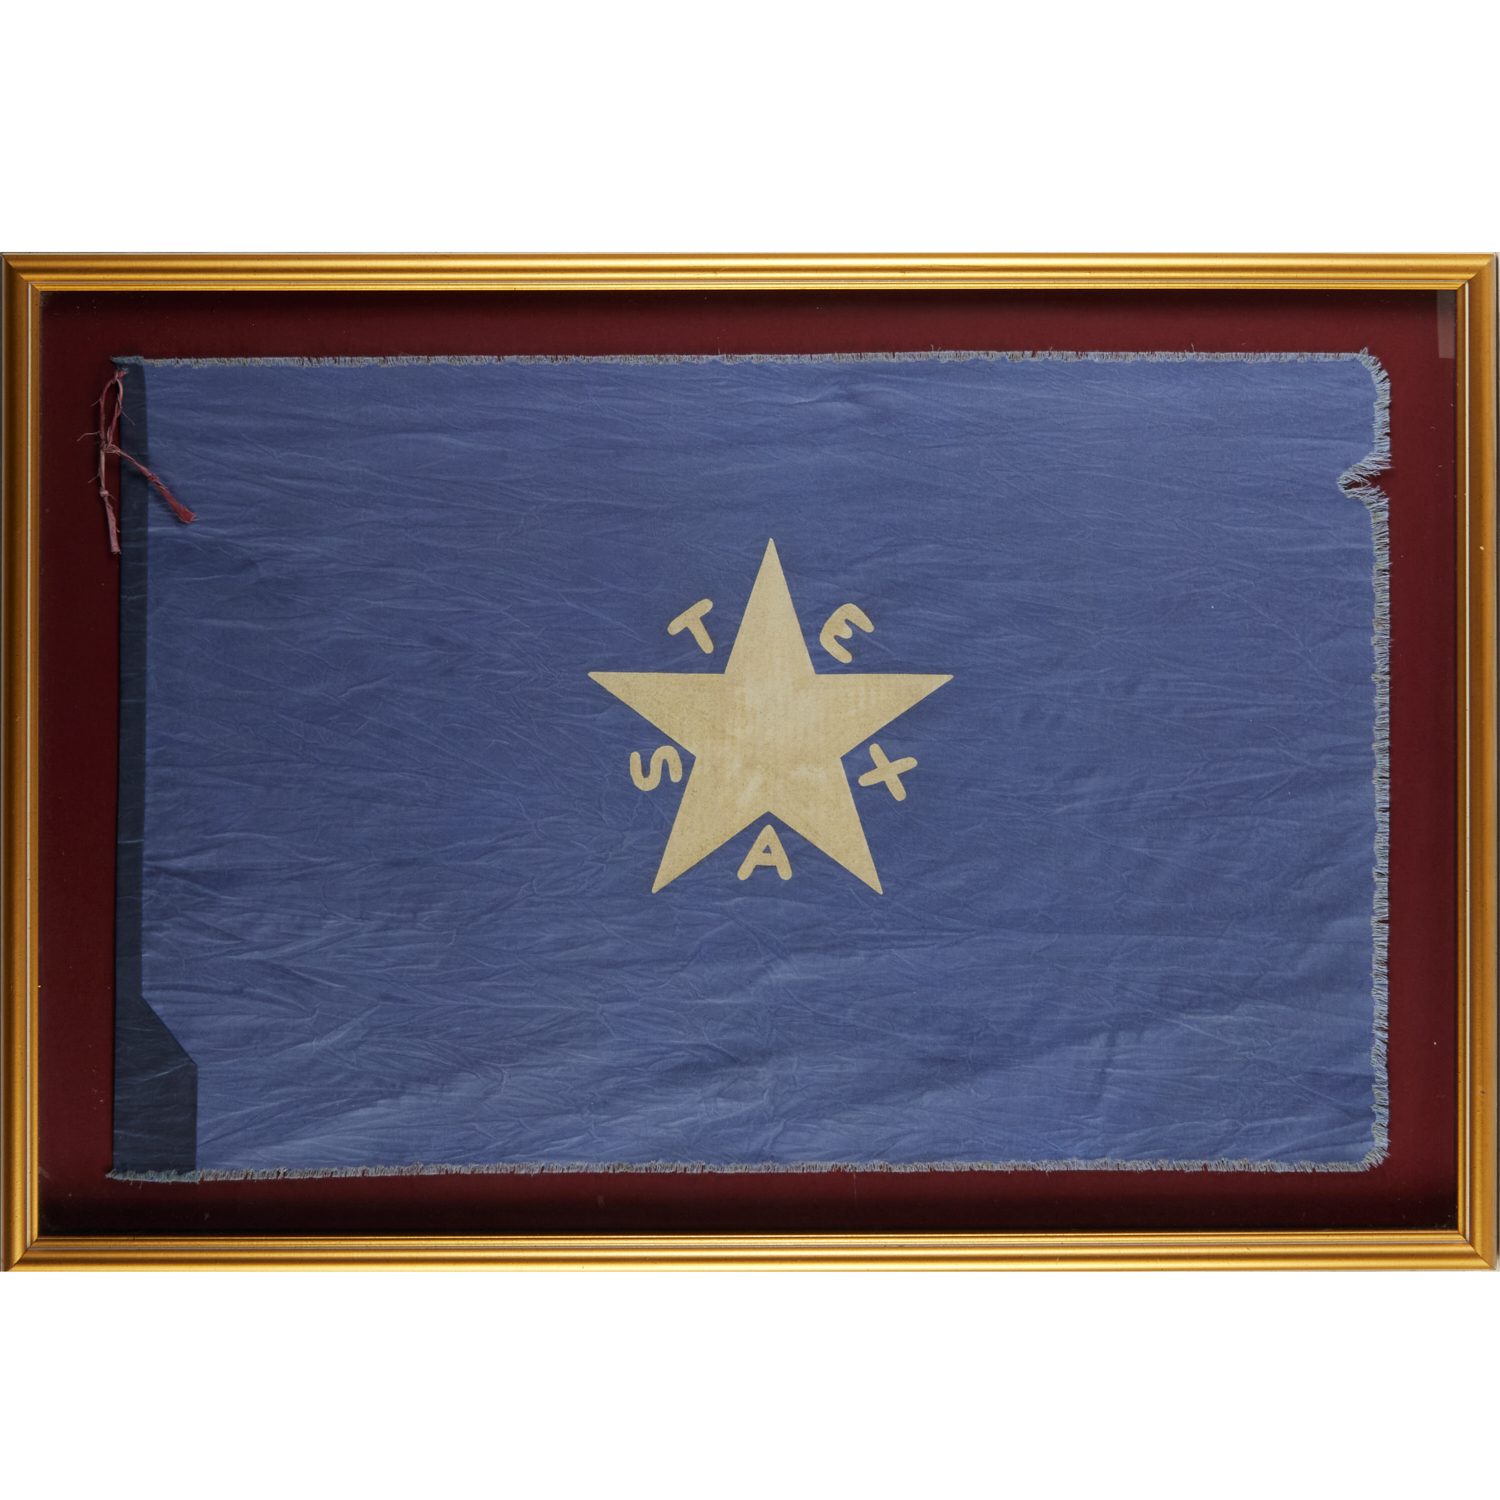 LARGE FRAMED TEXAS FIRST FLAG OF